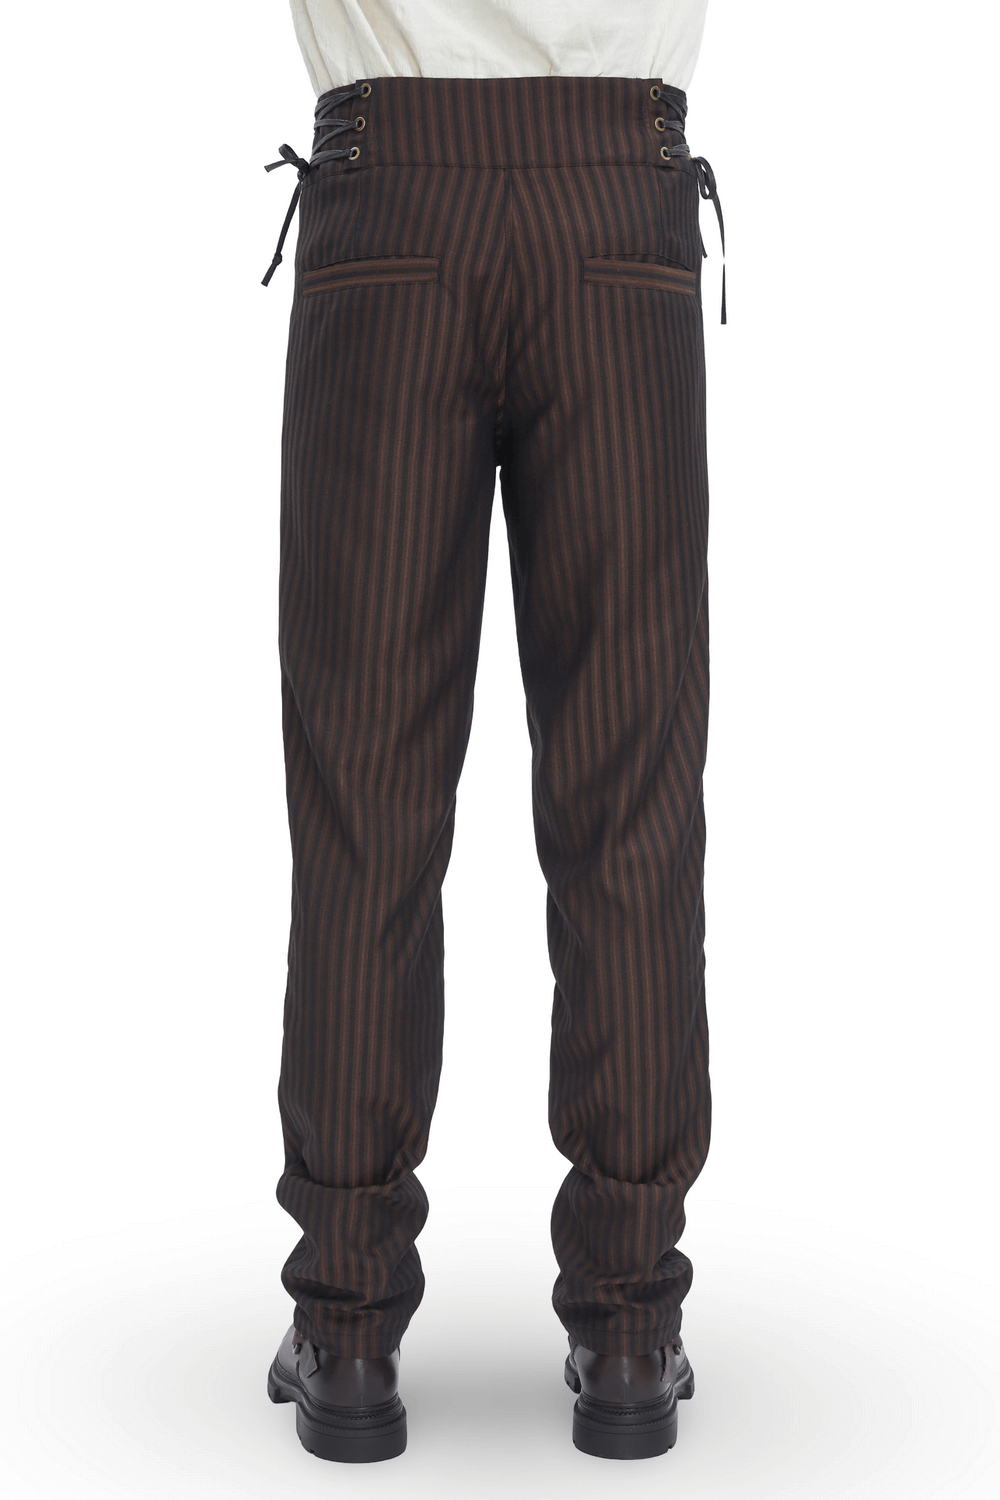 Chic Brown Striped Trousers with Lace-Up Sides